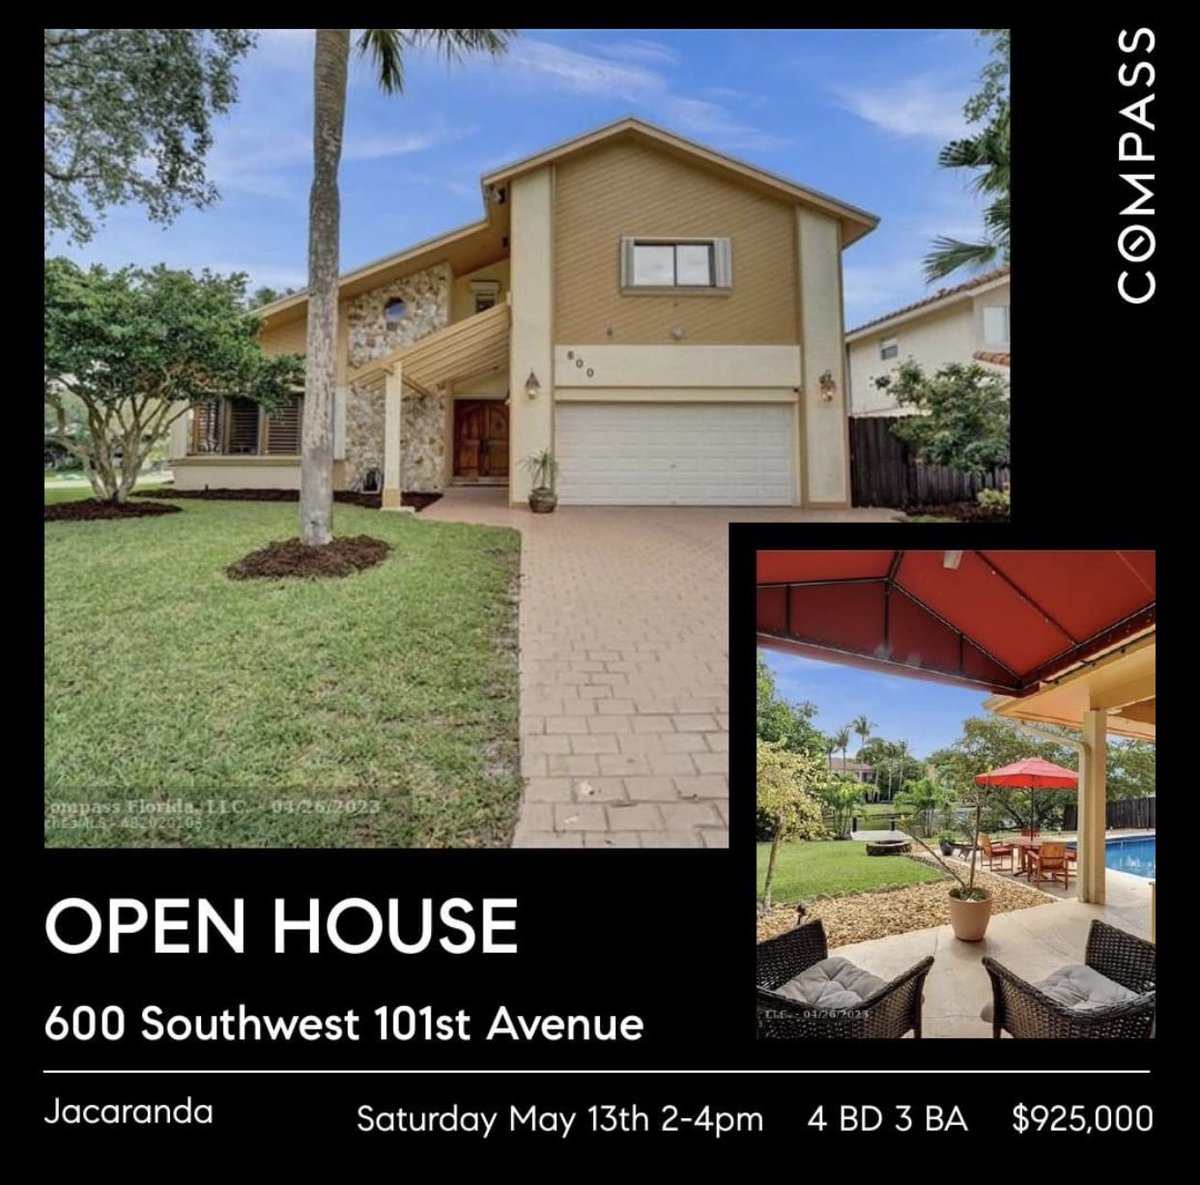 OPEN HOUSE!  Join Us Saturday May 13th 2-4pm.  Call Lisa Echea 305-431-4745 for more information.#openhouse #lisaechea #workingwiththebest #compassagent #echeagroup #justlistedhomes #ftlauderdalerealestate #openhouse #openhouse #sellinghomes